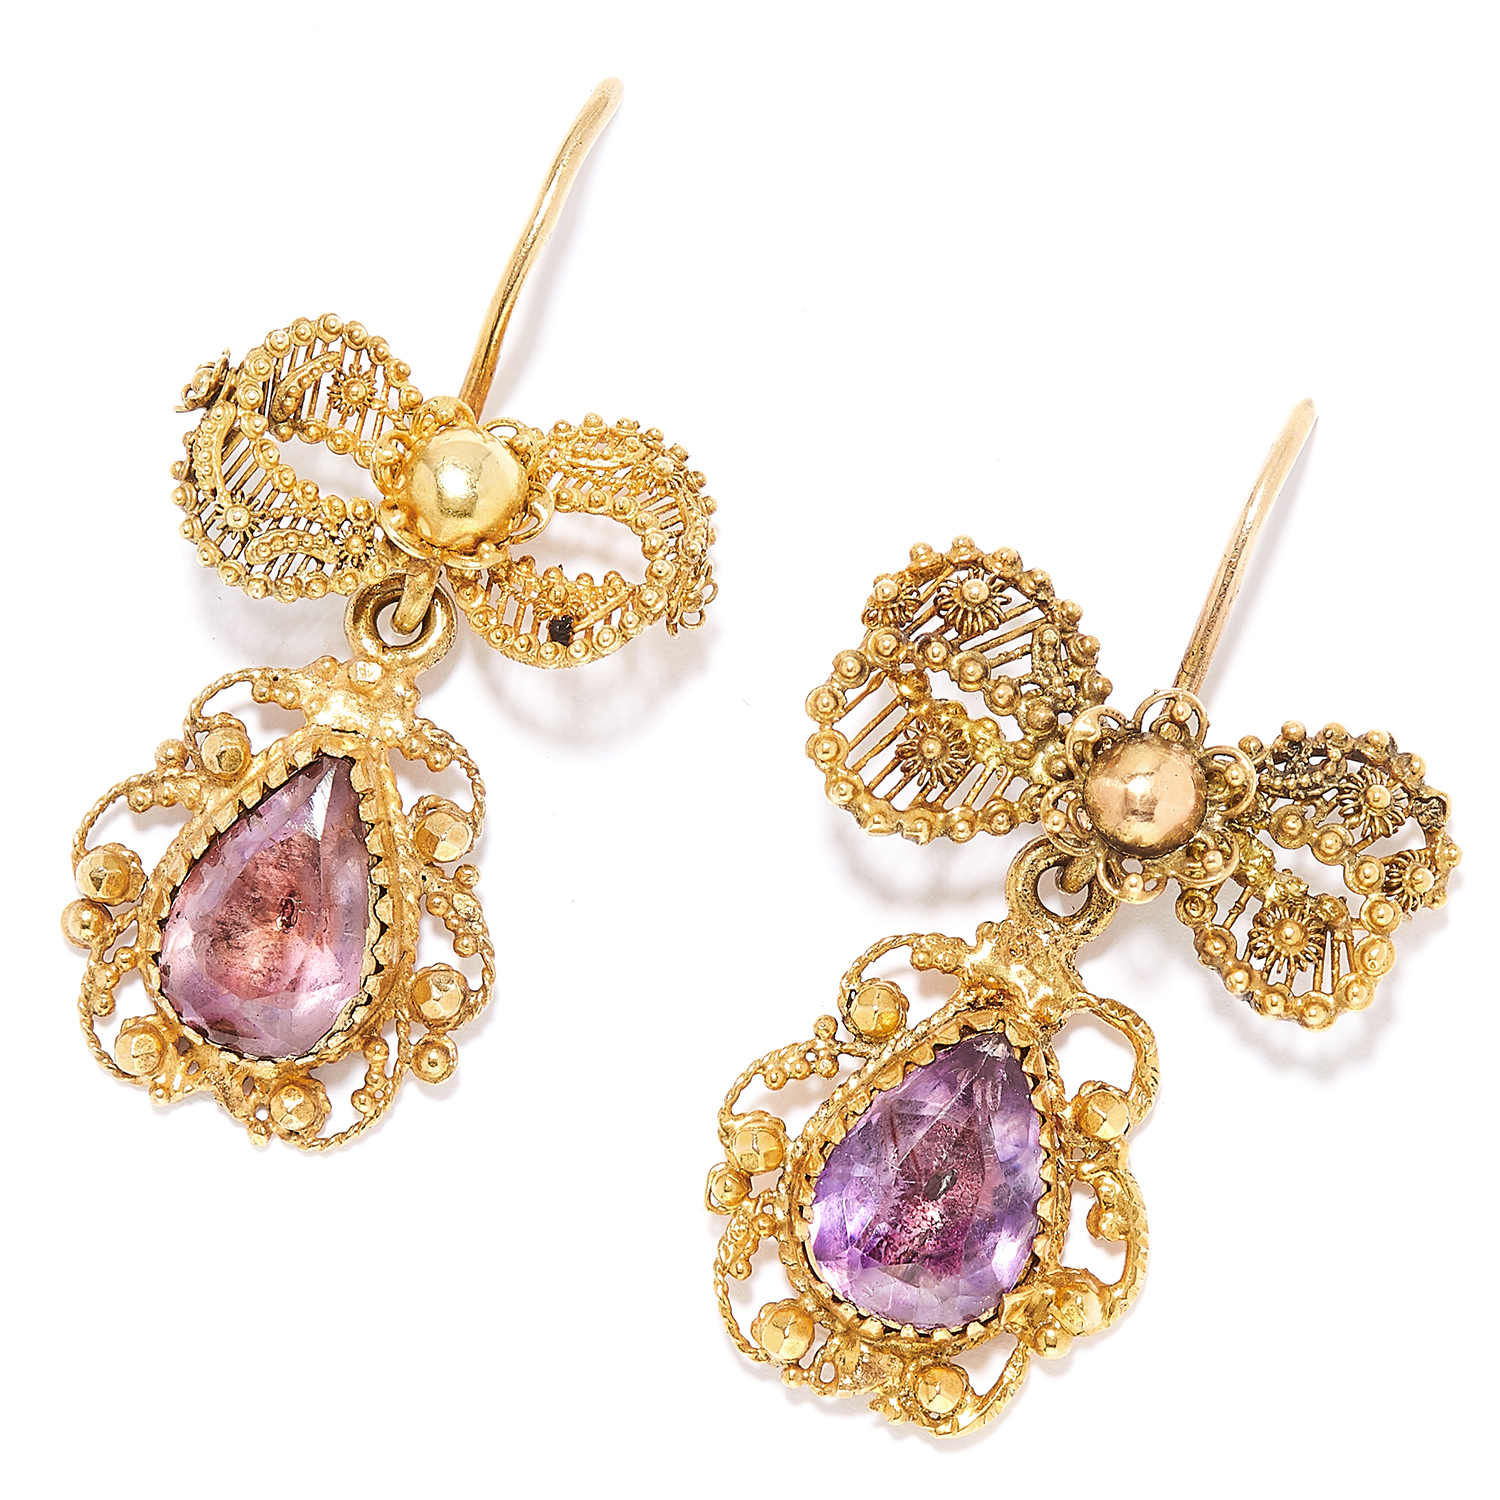 ANTIQUE AMETHYST EARRINGS in yellow gold, each comprising of scrolling ribbon motif set with each